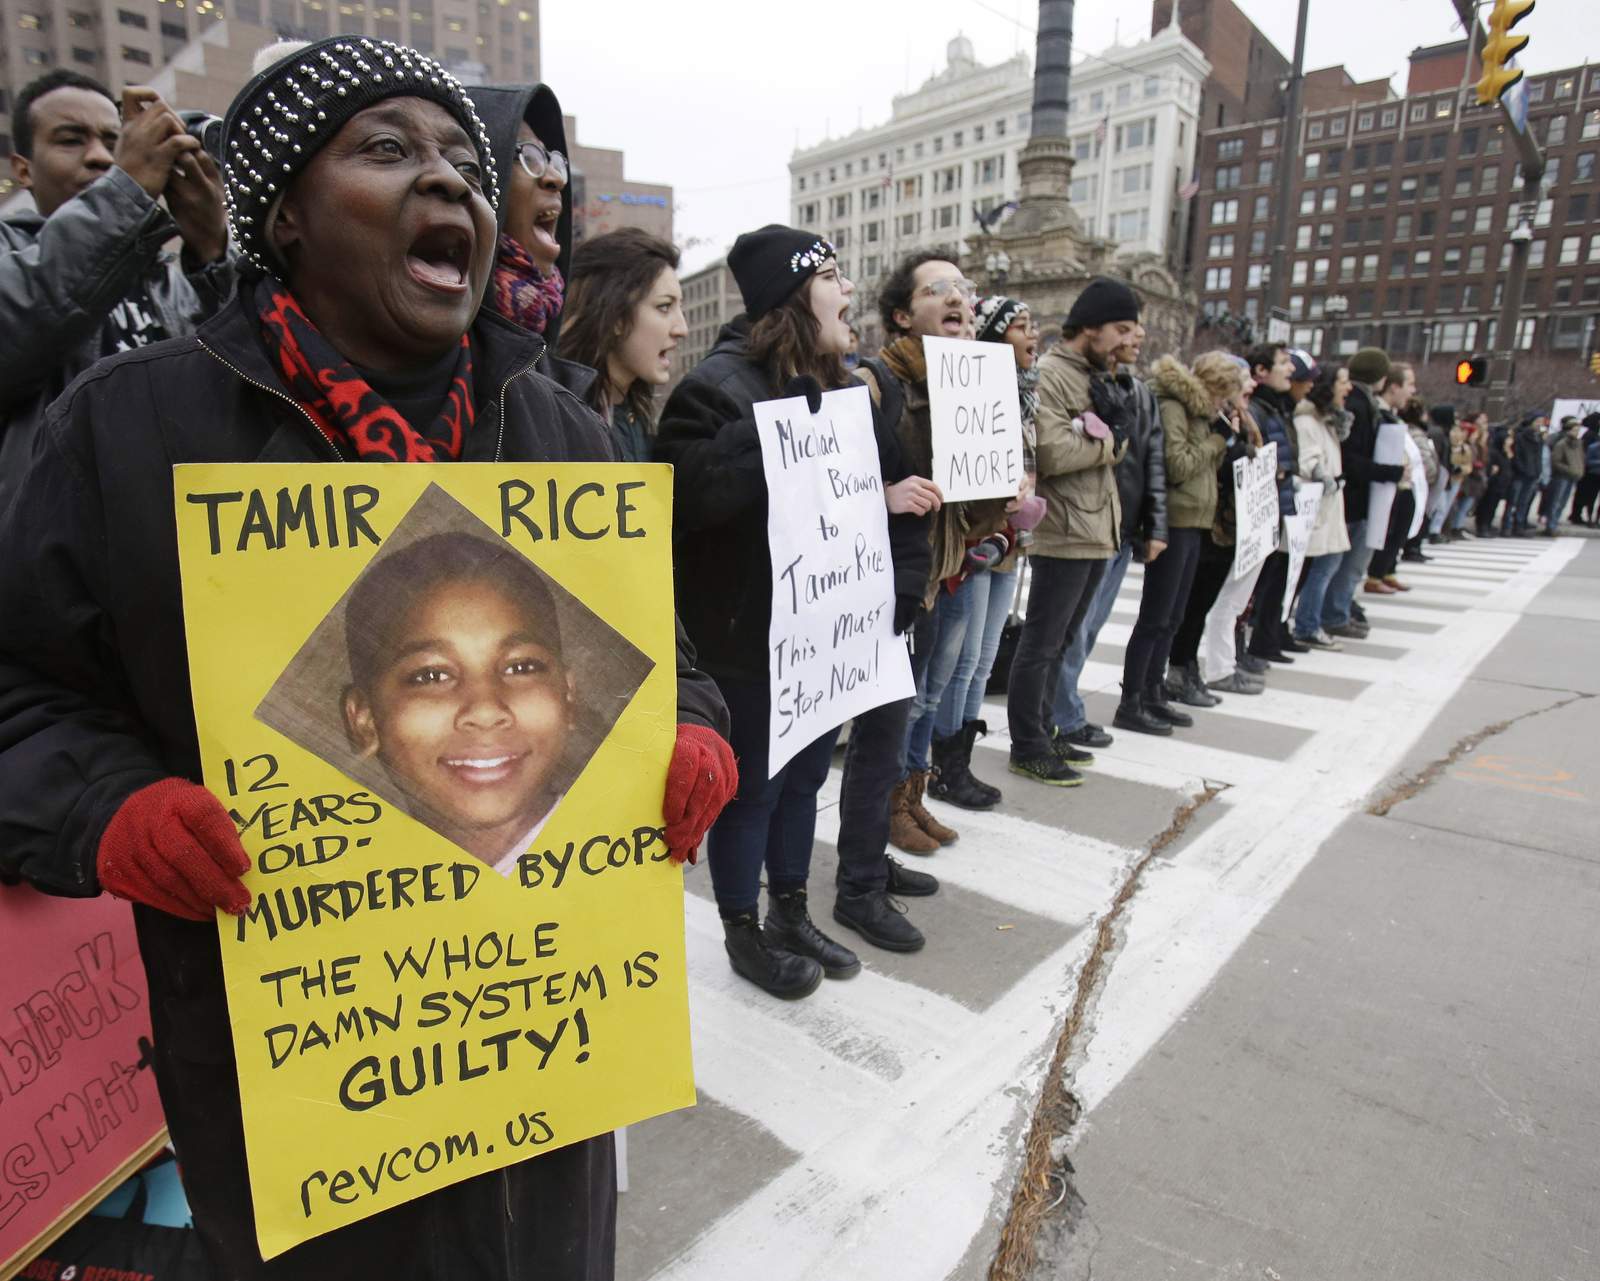 Family asks feds to reopen case on Tamir Rice police killing